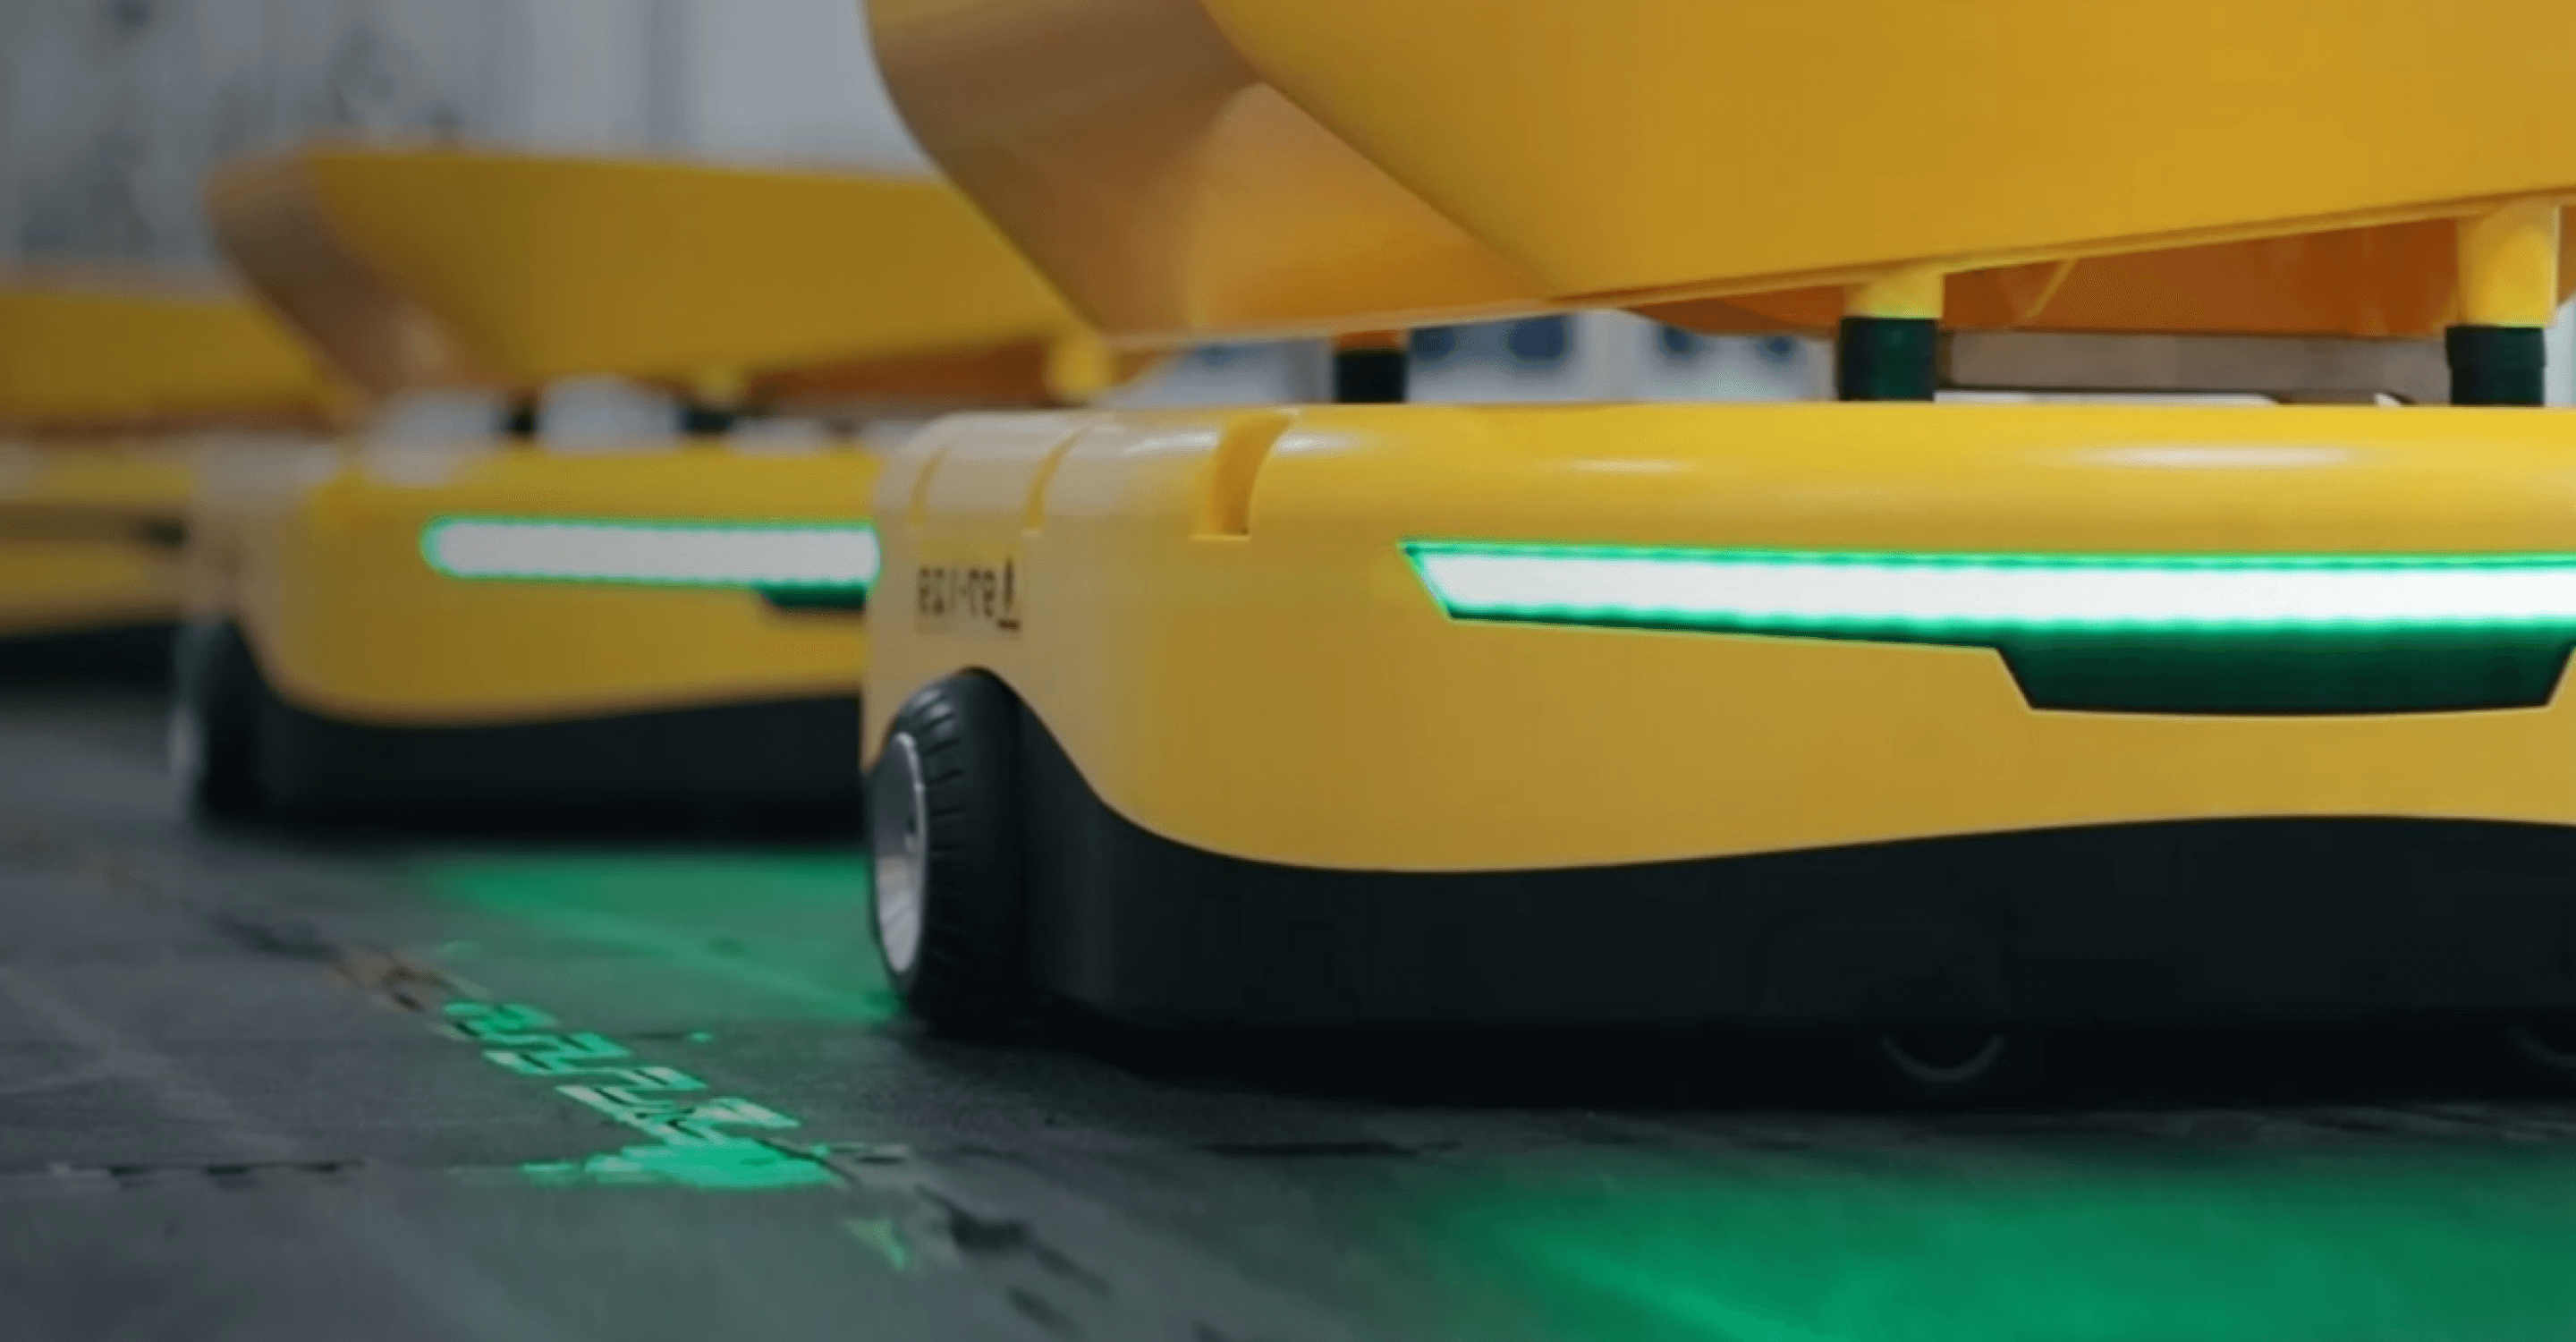 Close up of automated robots on wheels that have a green, glowing light on the front.